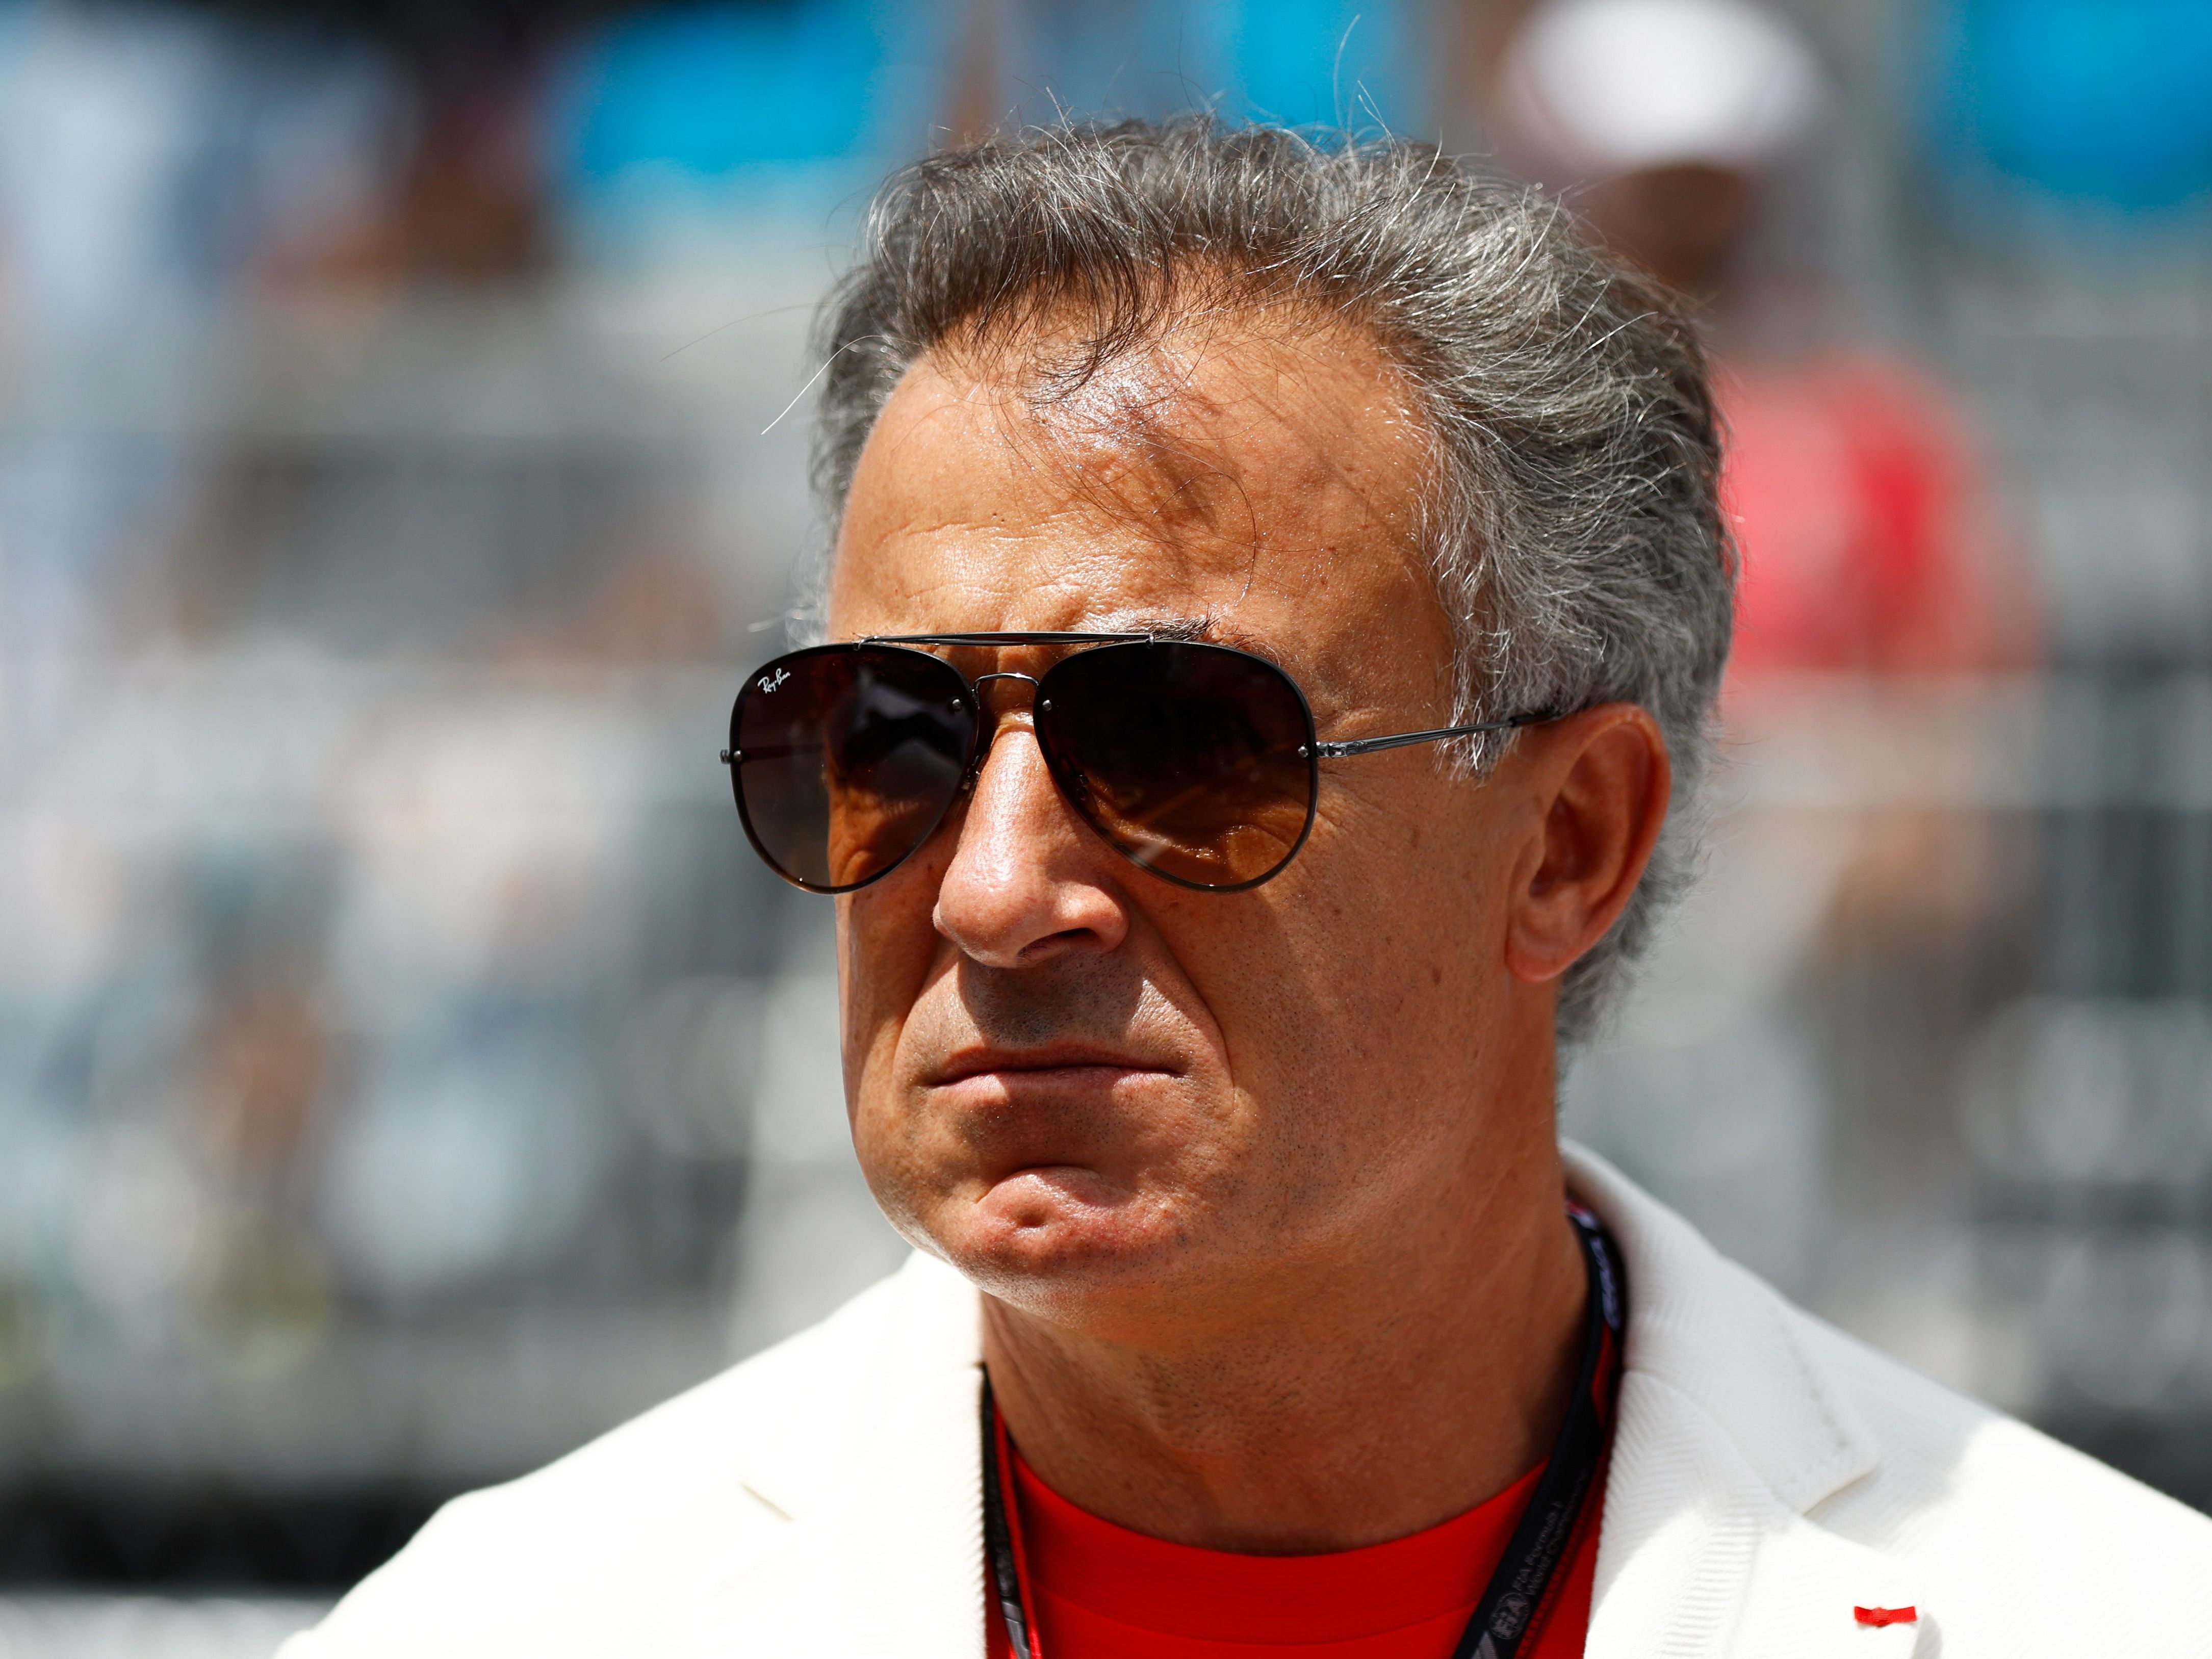 Jean Alesi looks on from the grid during the 2022 F1 Miami Grand Prix (Photo by Jared C. Tilton/Getty Images)